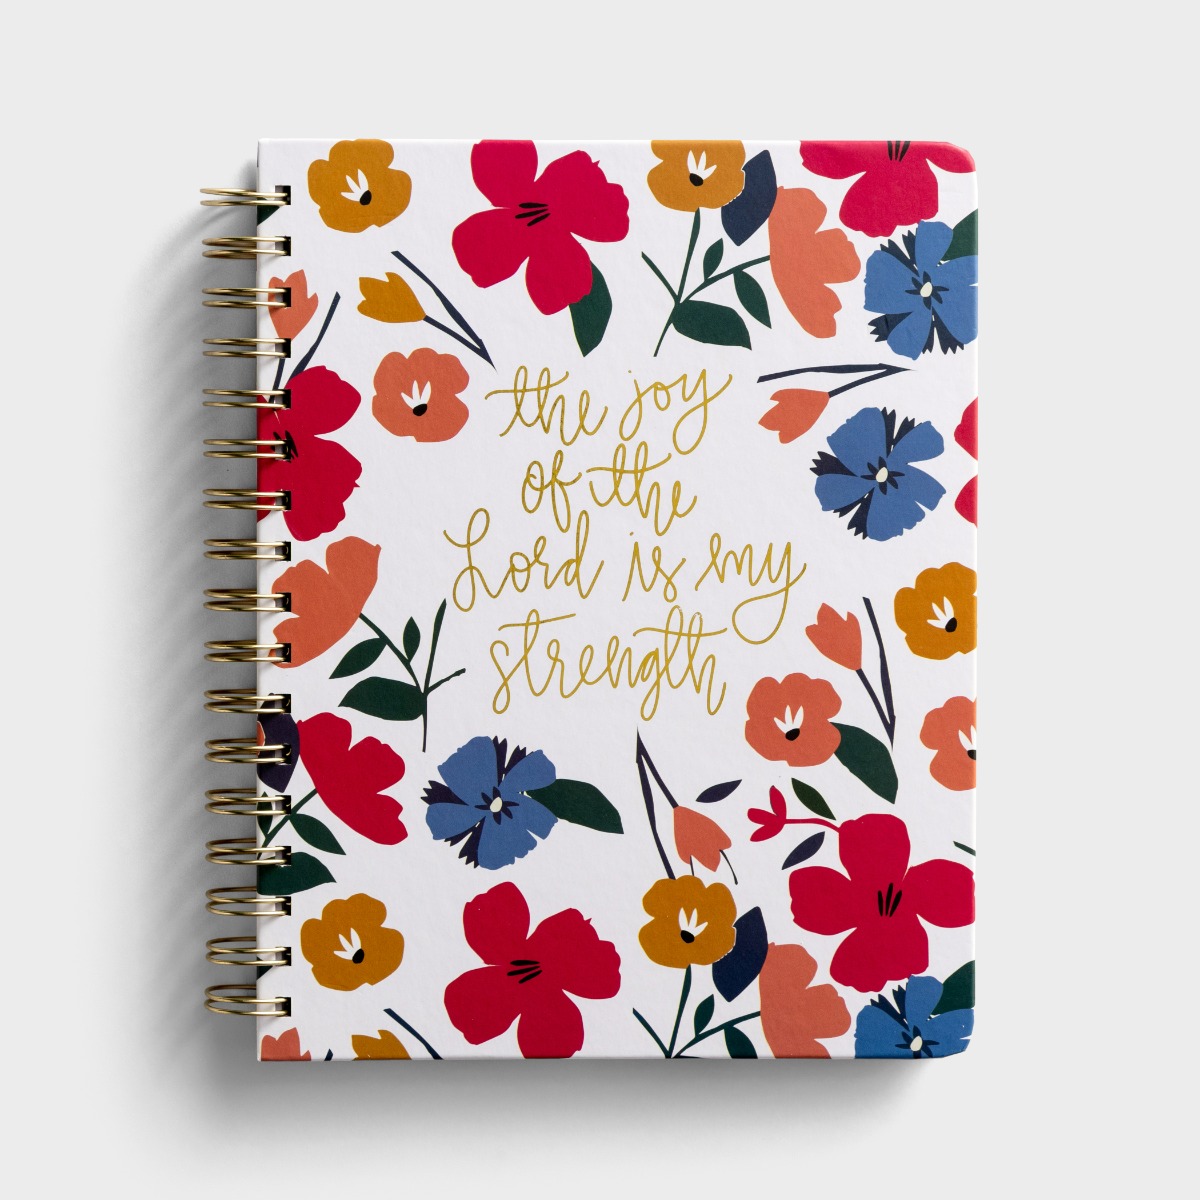 Joy of the Lord - Spiral Journal